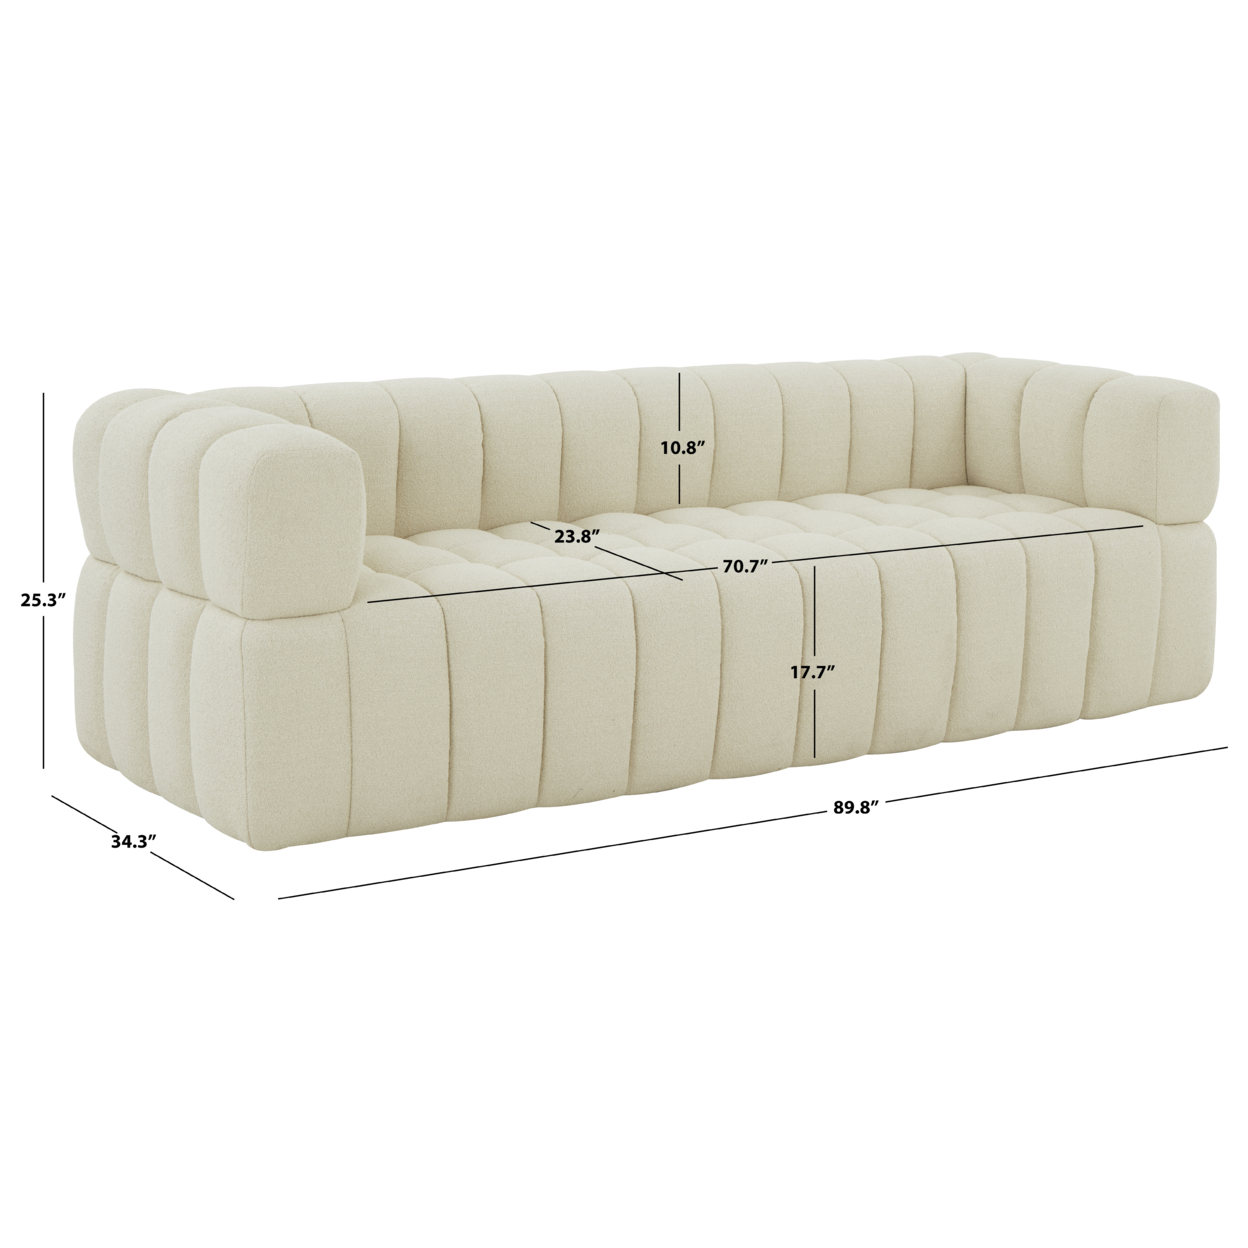 SAFAVIEH COUTURE Calyna Channel Tufted Sofa Creme